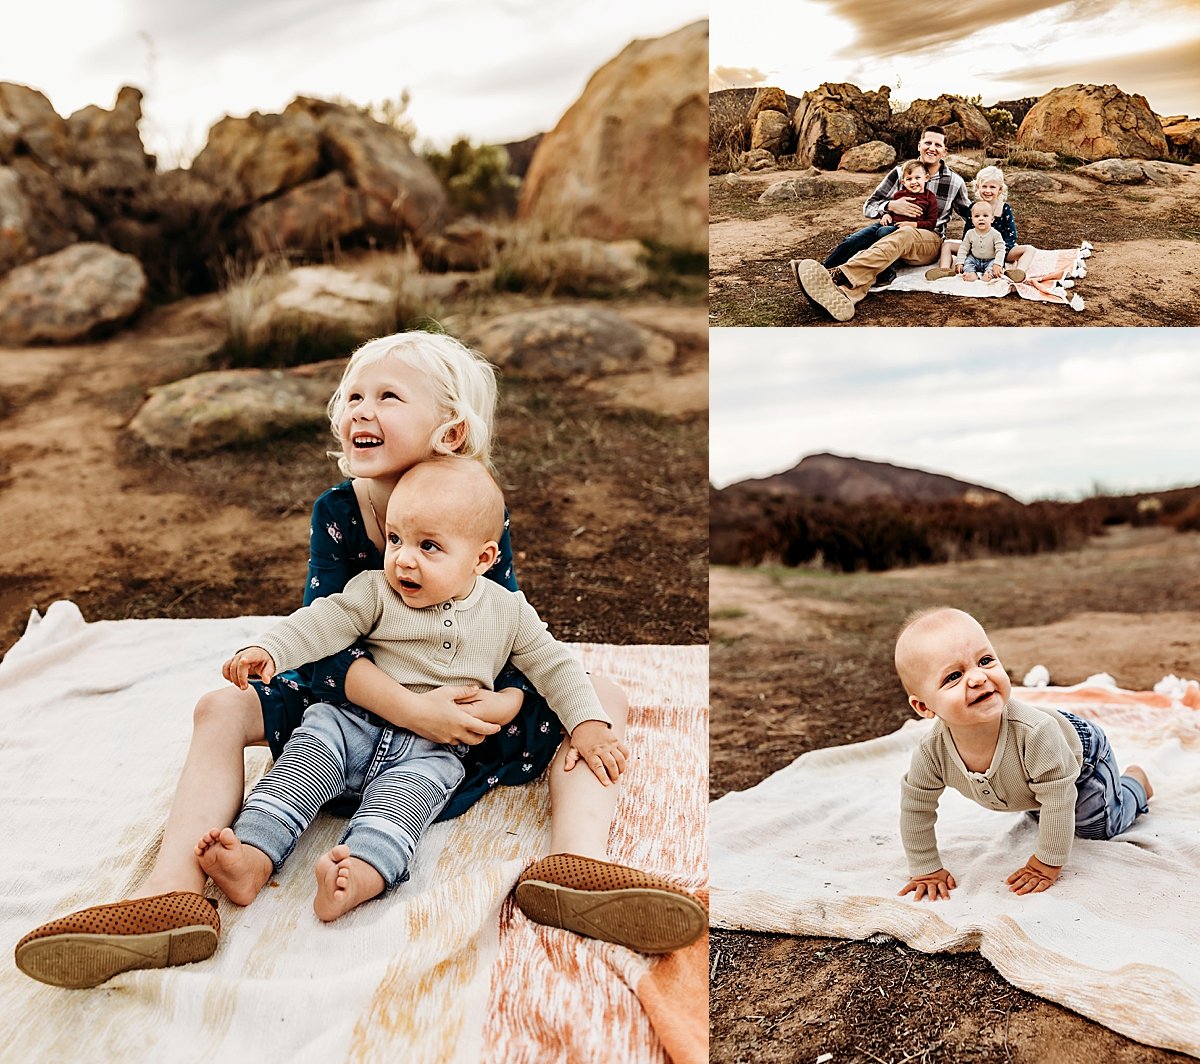  kids sitting on blanket wearing jeans and a dress for by Christa paustenbaugh photography 